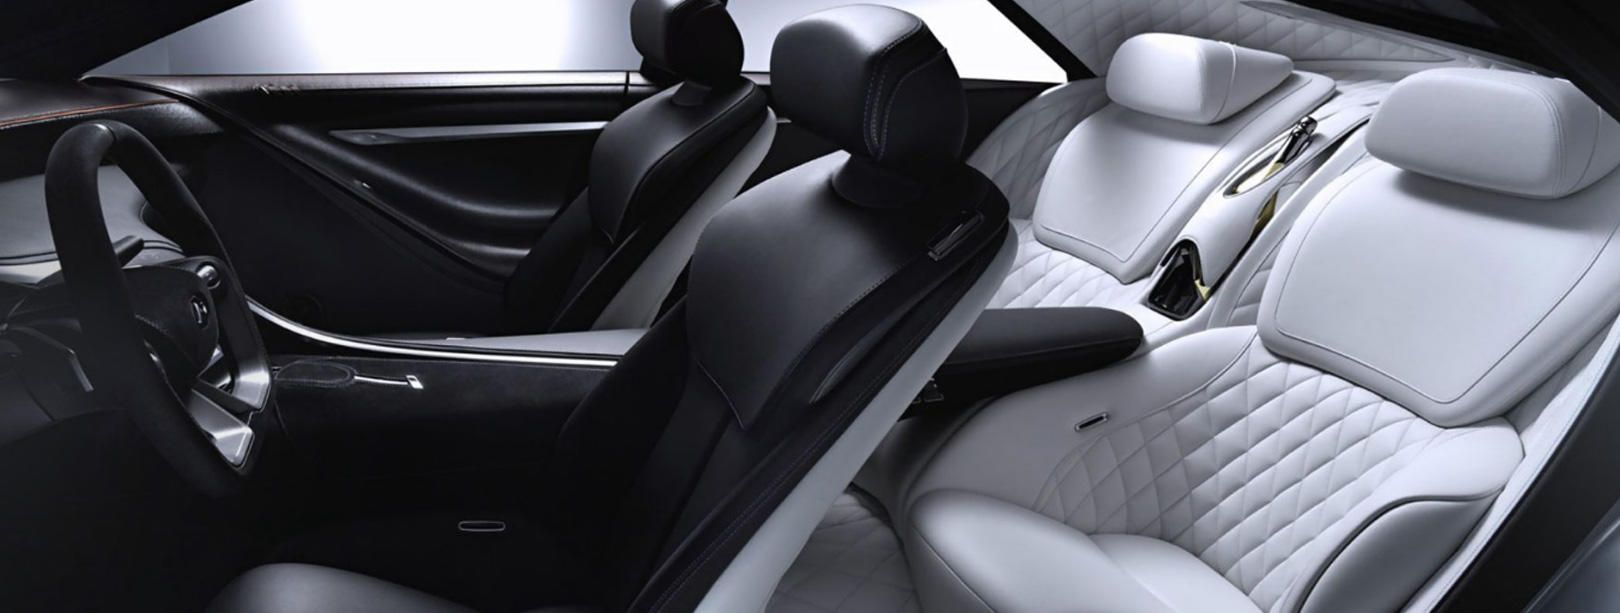 Elevating Driving Comfort Ingenuity of Vehicle Interior Parts